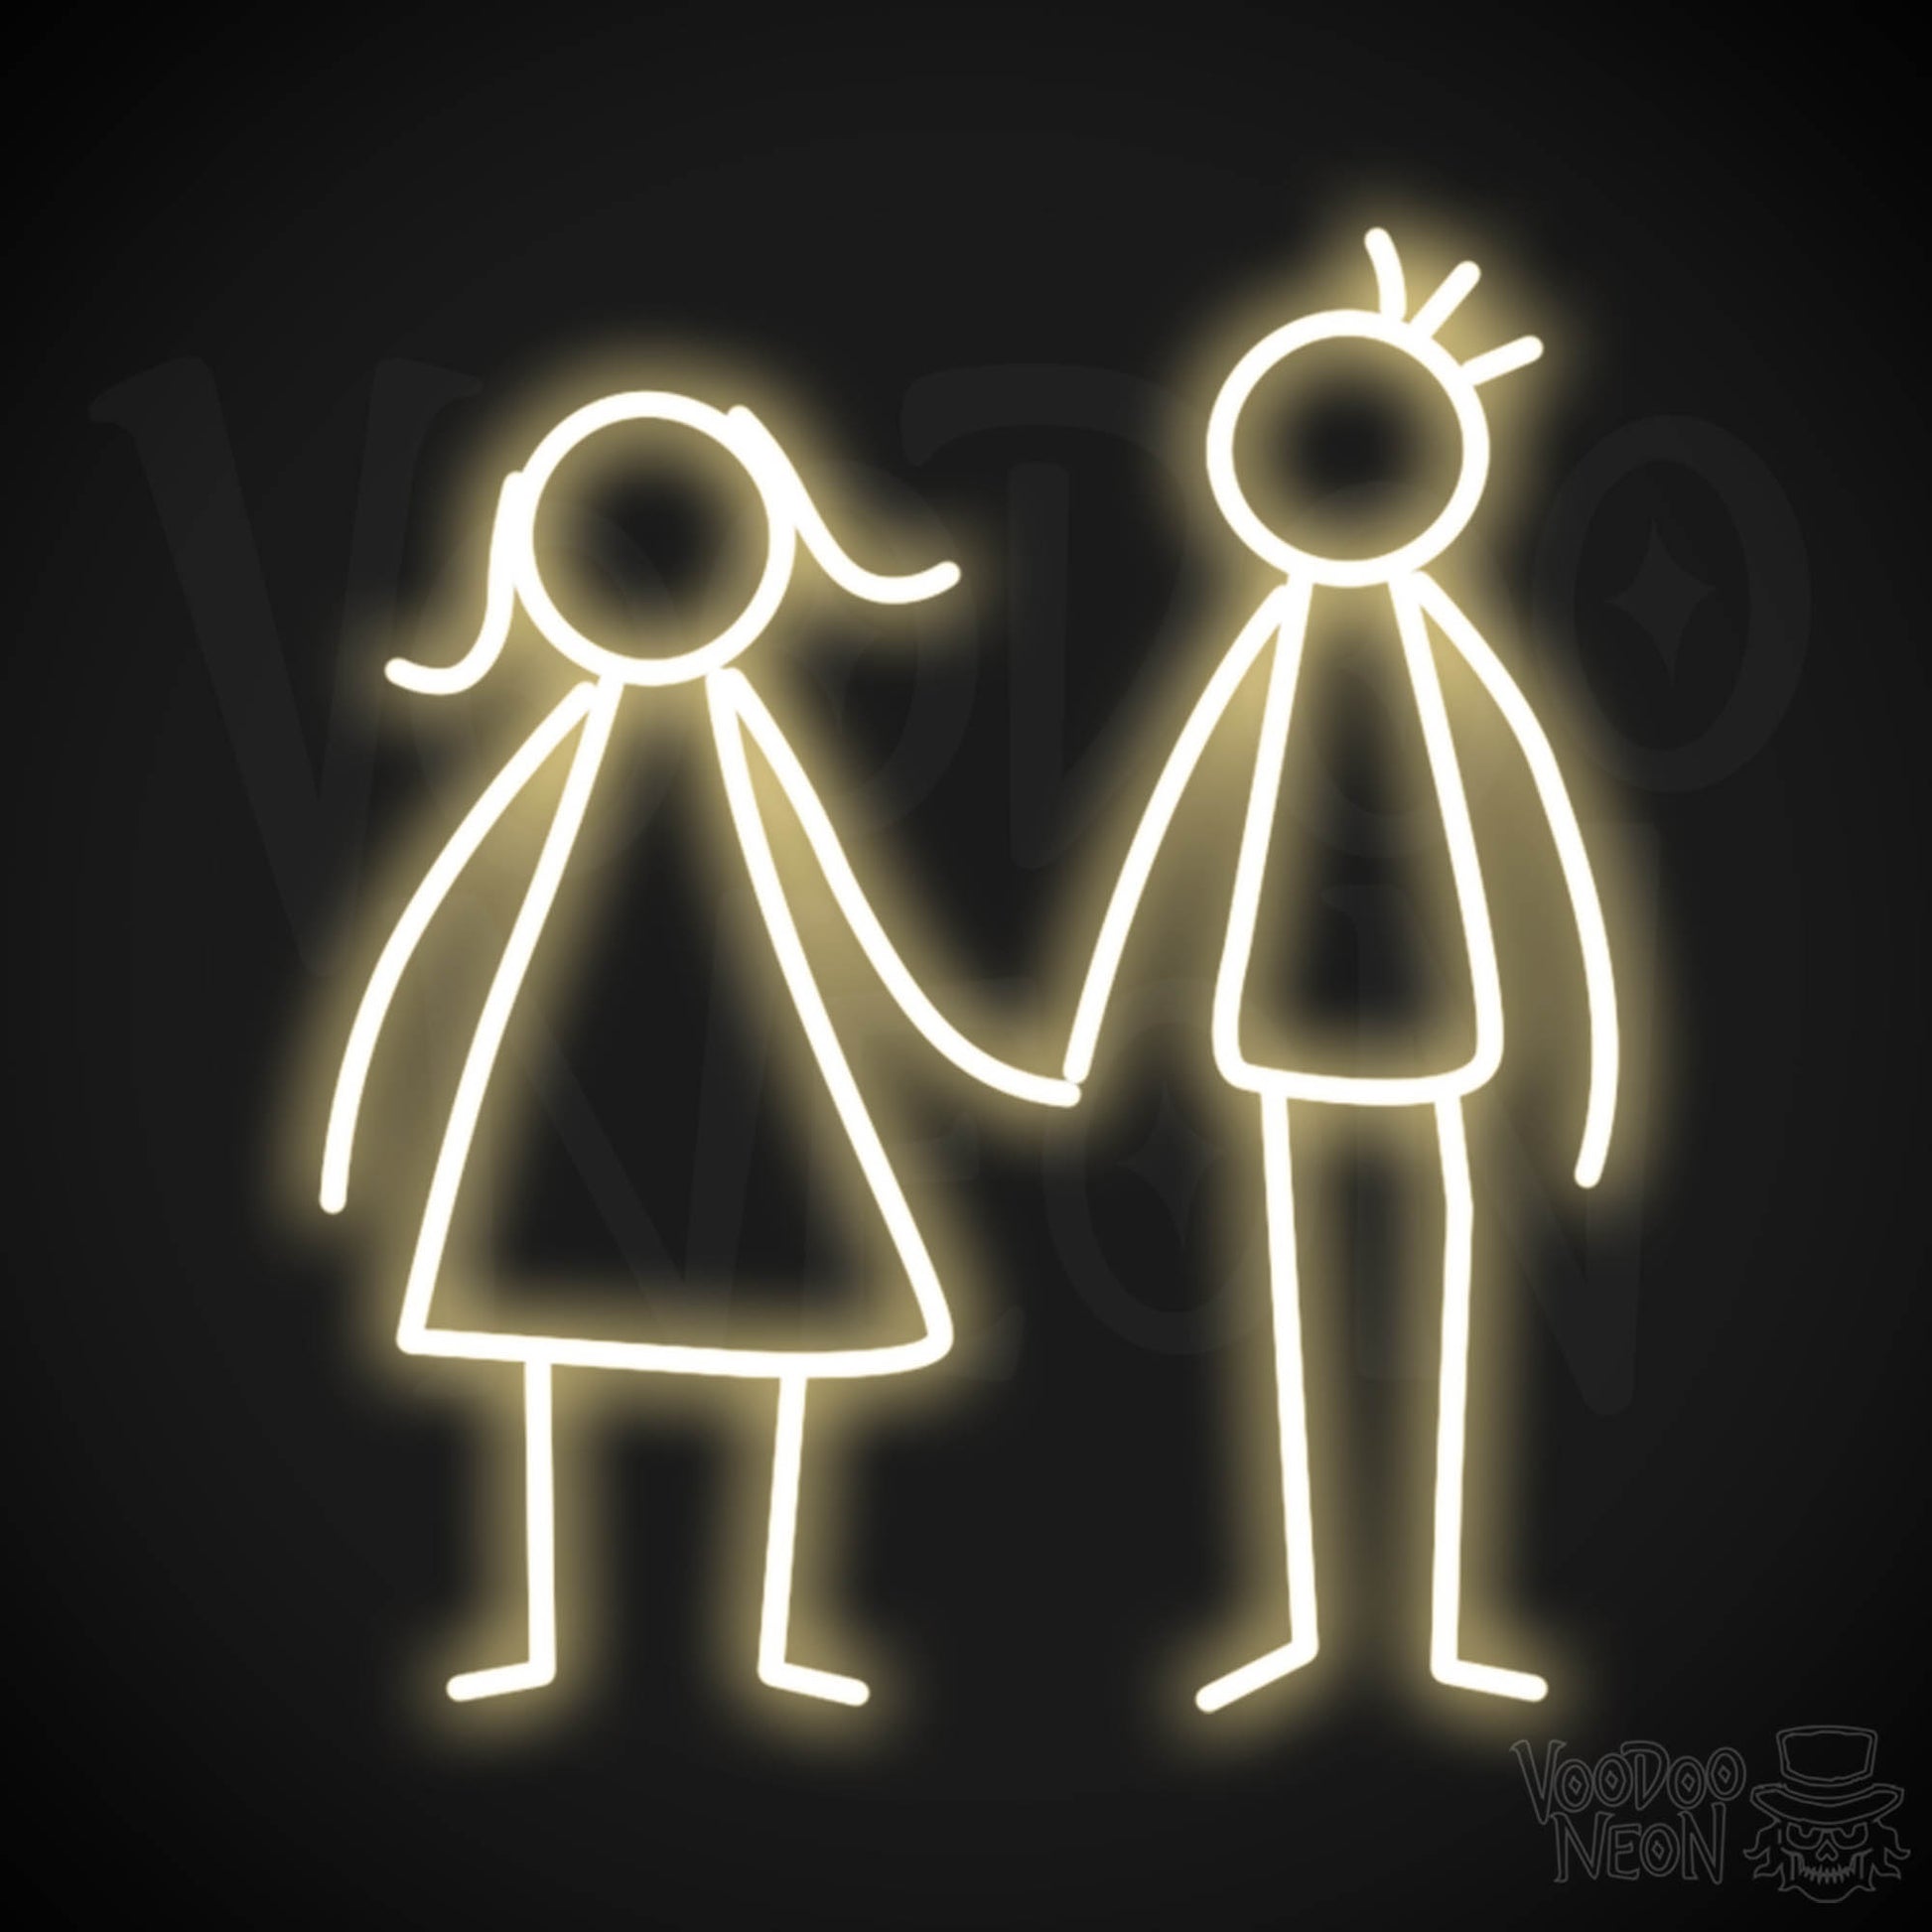 Stick Figures Holding Hands Neon Sign - Neon Stick Figures Wall Art - Color Warm White